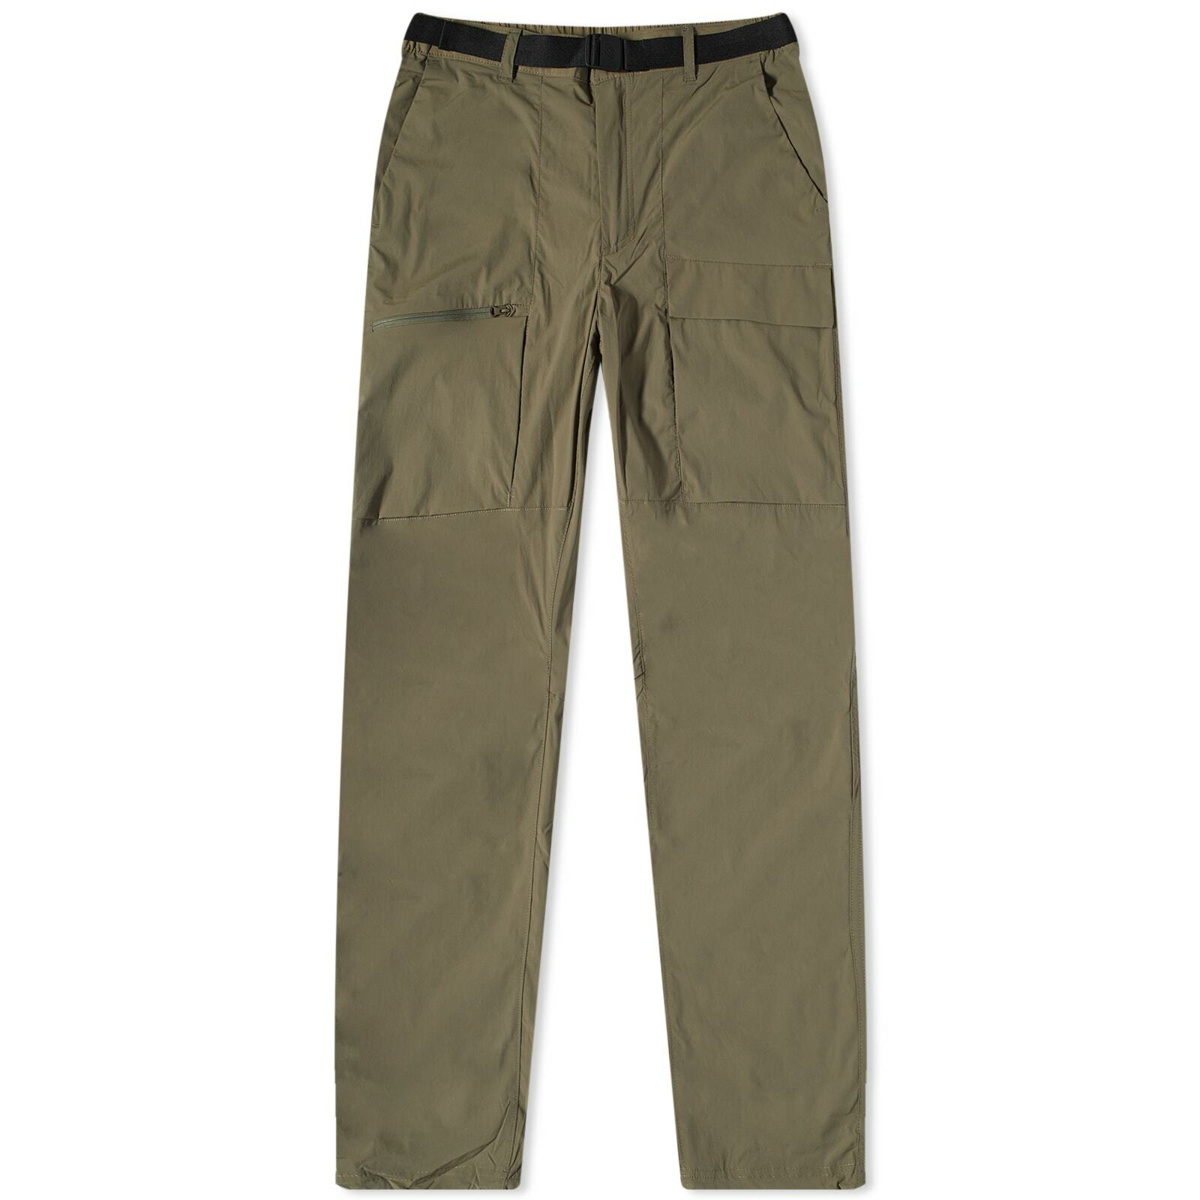 Men's Maxtrail™ II Hiking Trousers with Removable Belt